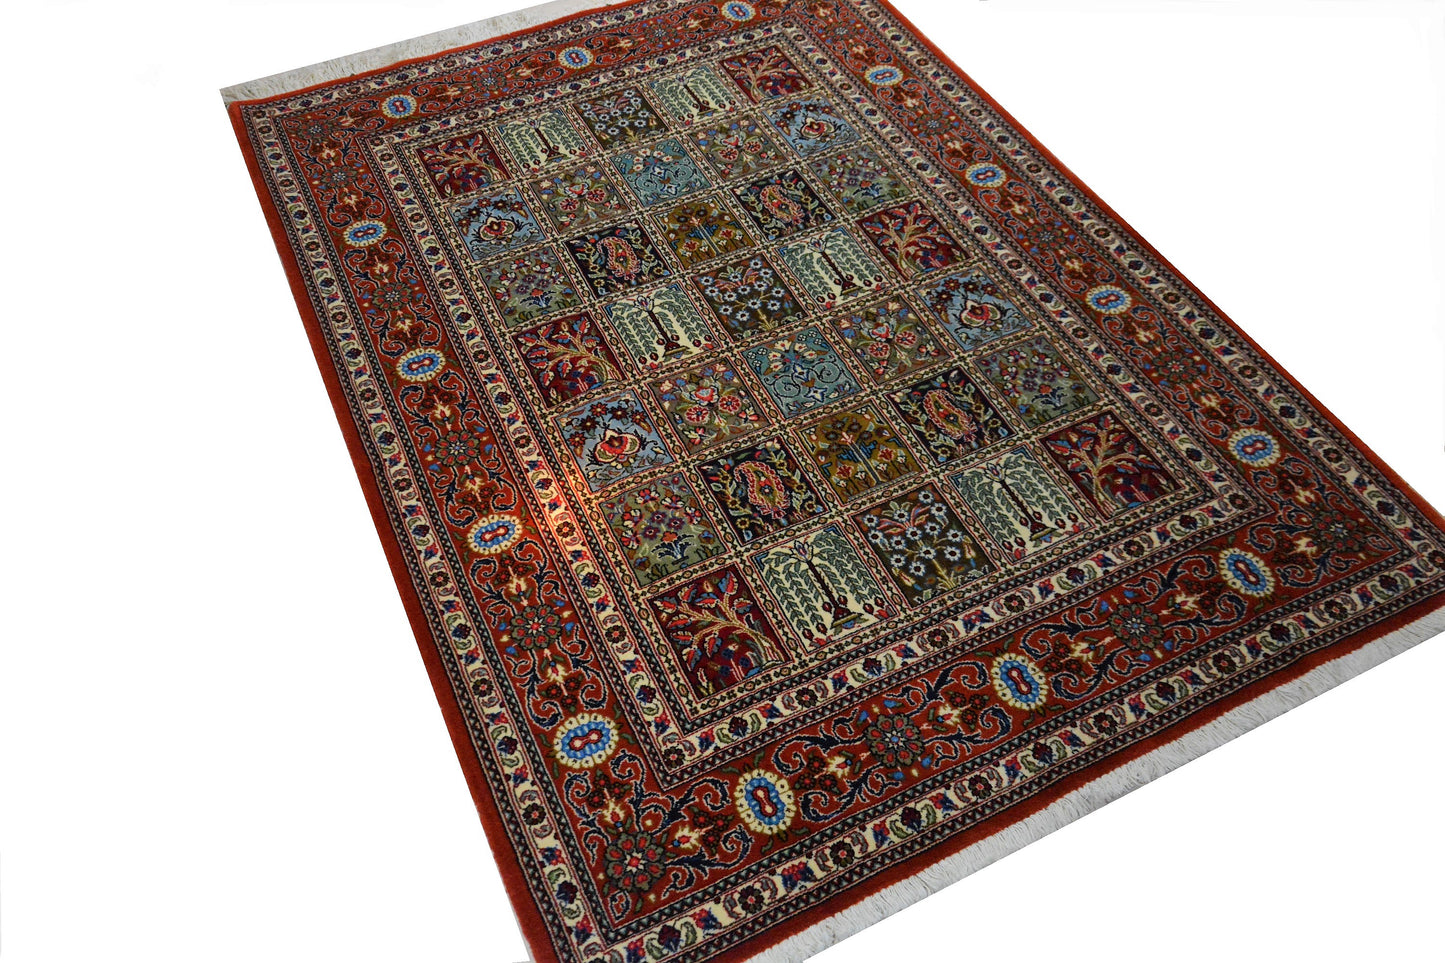 A Persian hand-knotted atelier Ghom carpet made of kork wool. Size 160 x 240! With a classic garden pattern!